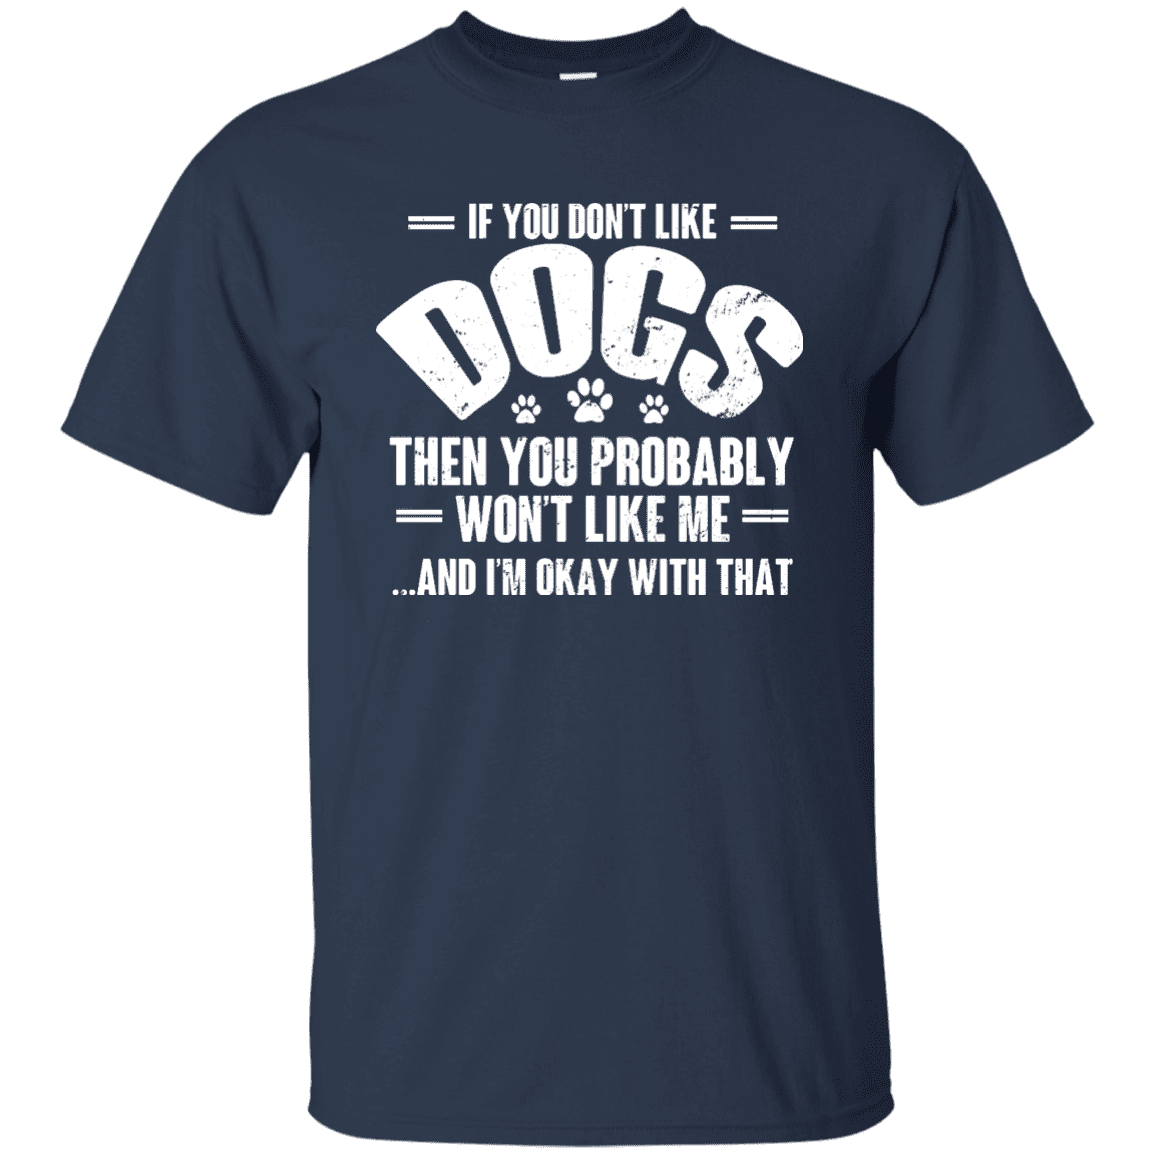 If You Don't Like Dogs - T Shirt.